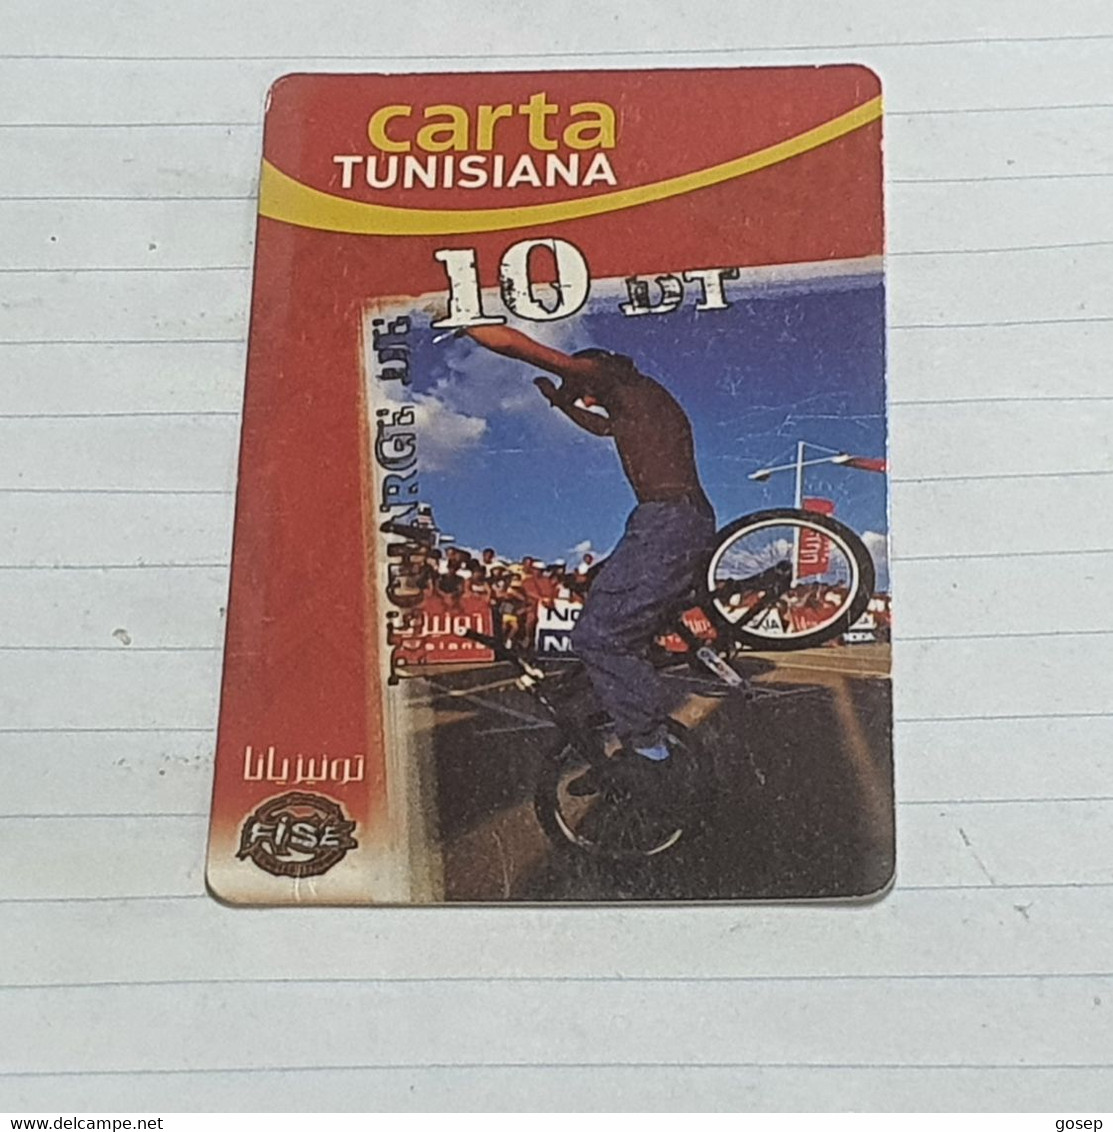 TUNISIA-(TUN-REF-TUN-20)-sport Extrem7-(116)-(8919-119-6551-751)(look From Out Side Card Barcode)-used Card - Tunesien